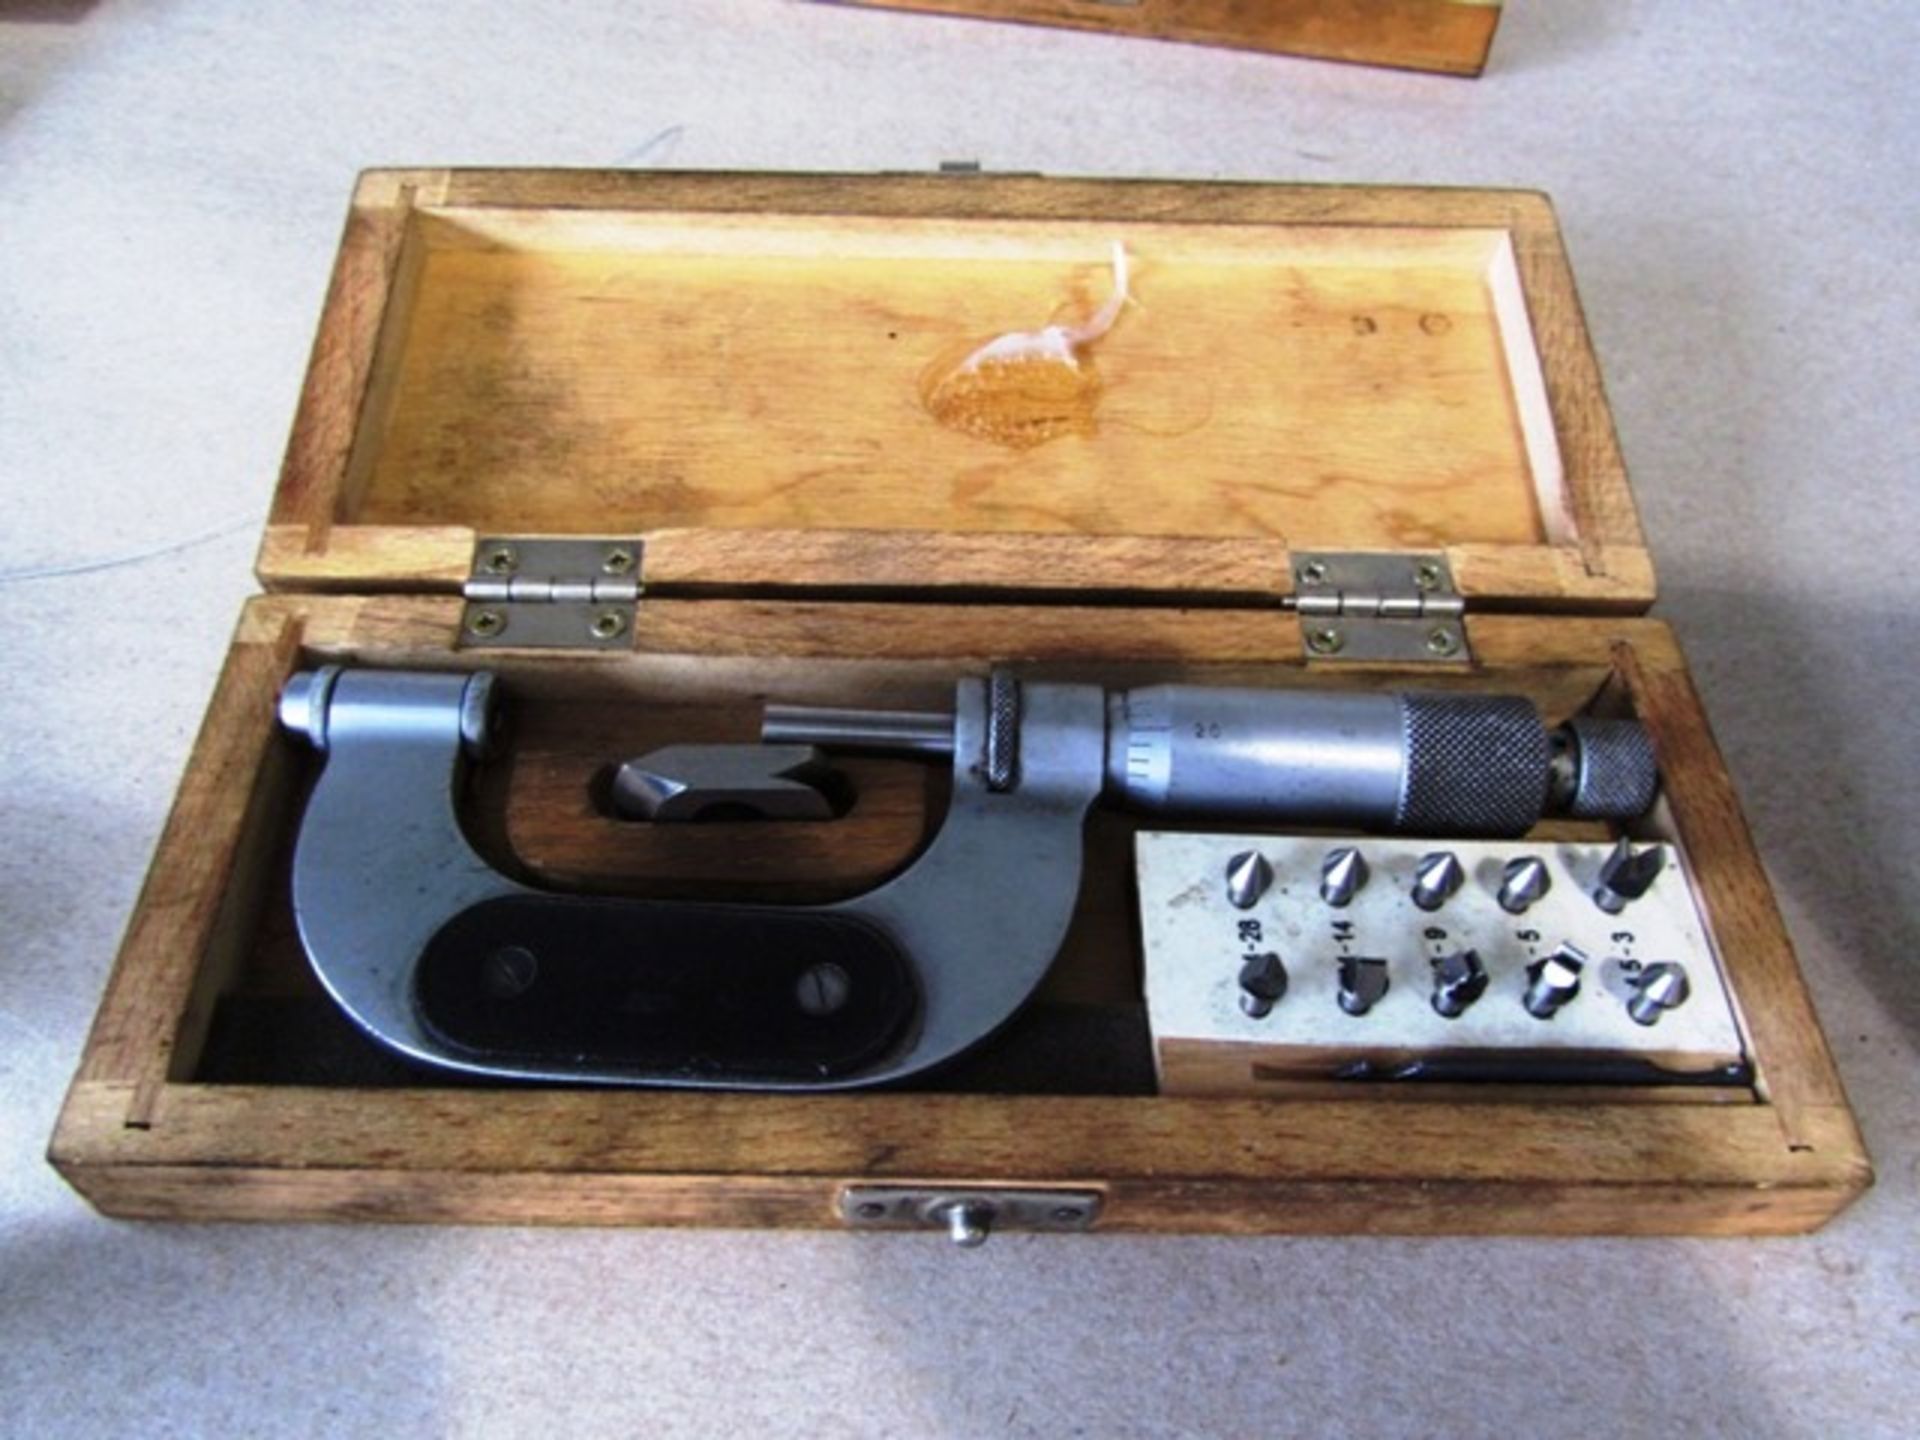 VIN 1'' - 2'' Pitch Micrometer